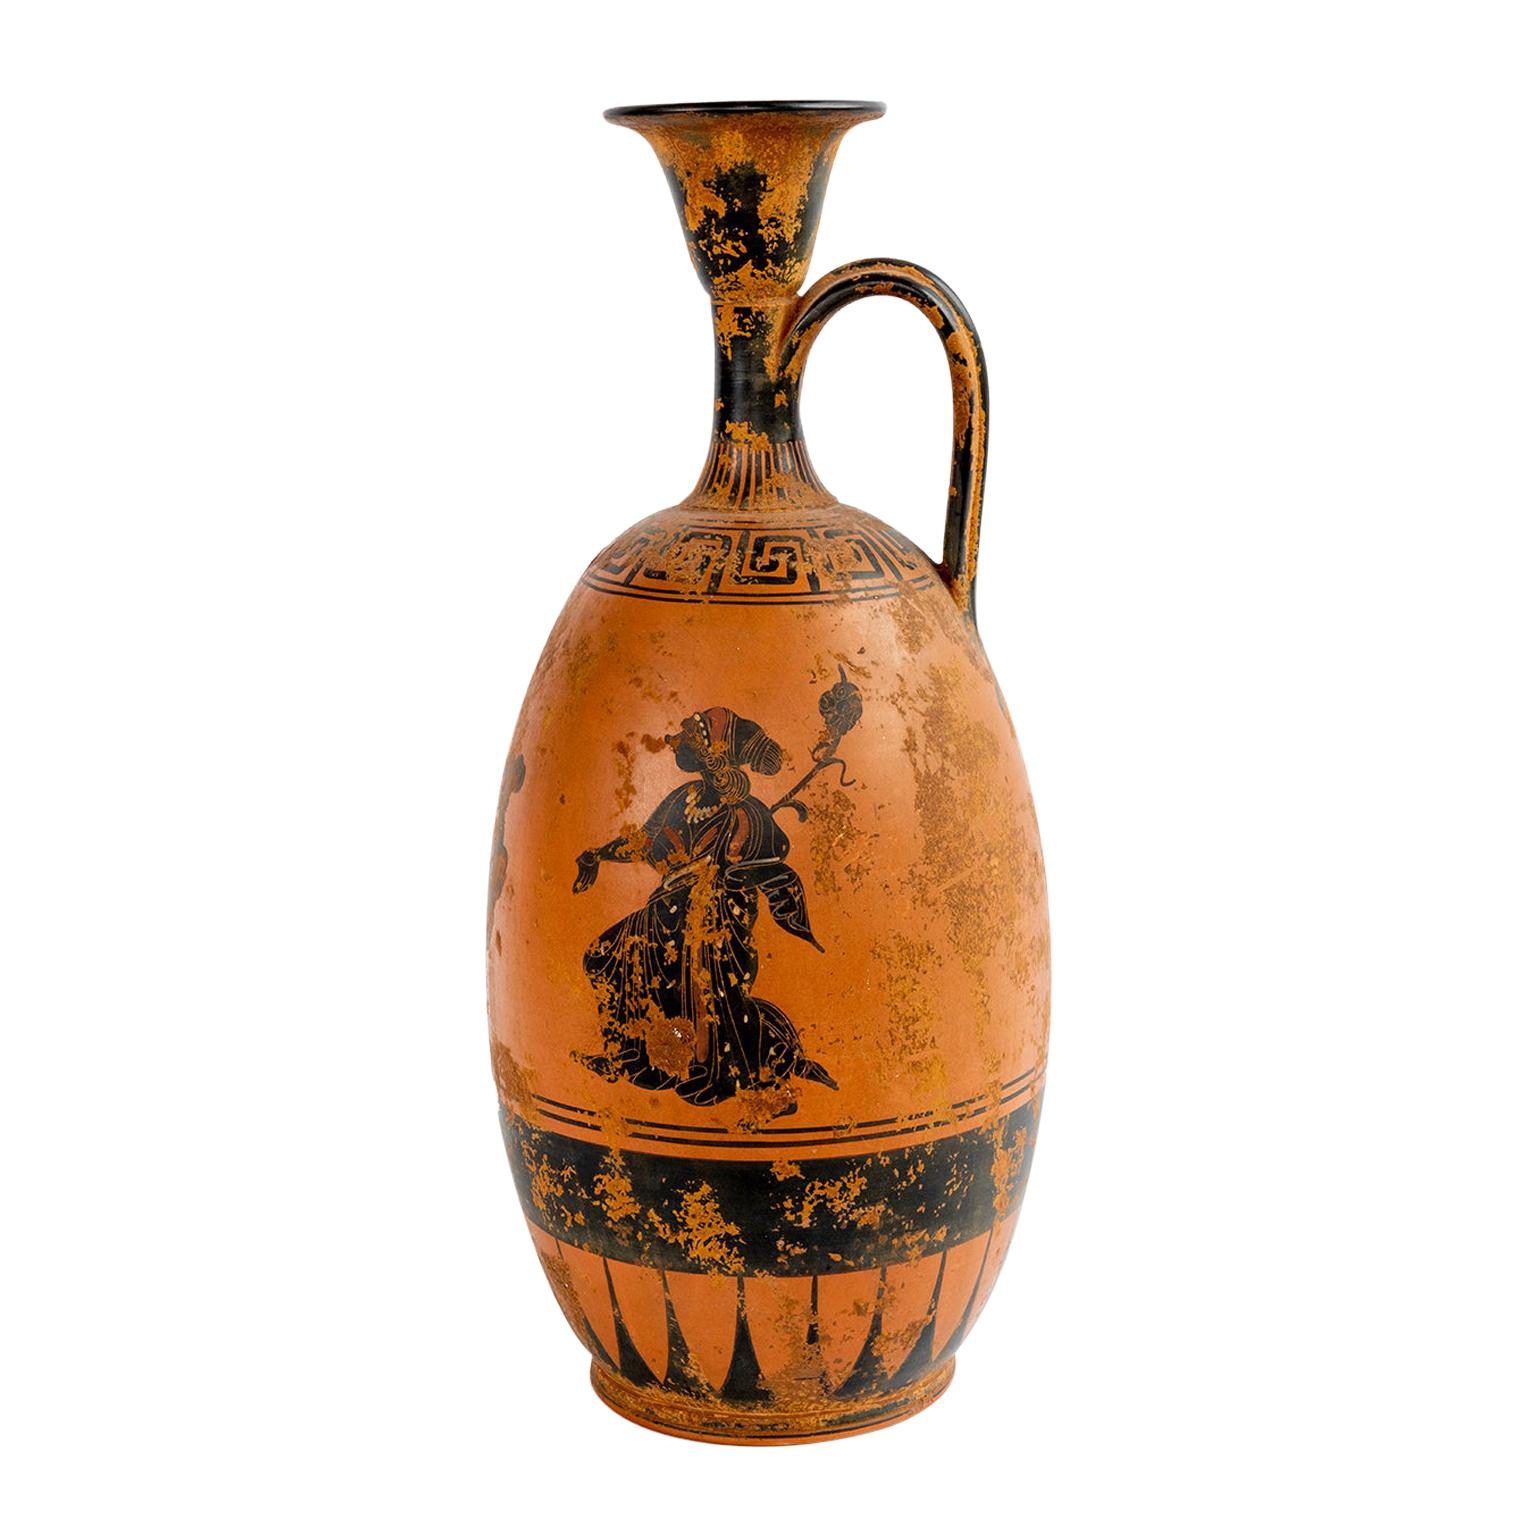 Painted Greek Vessel with a Single Handle